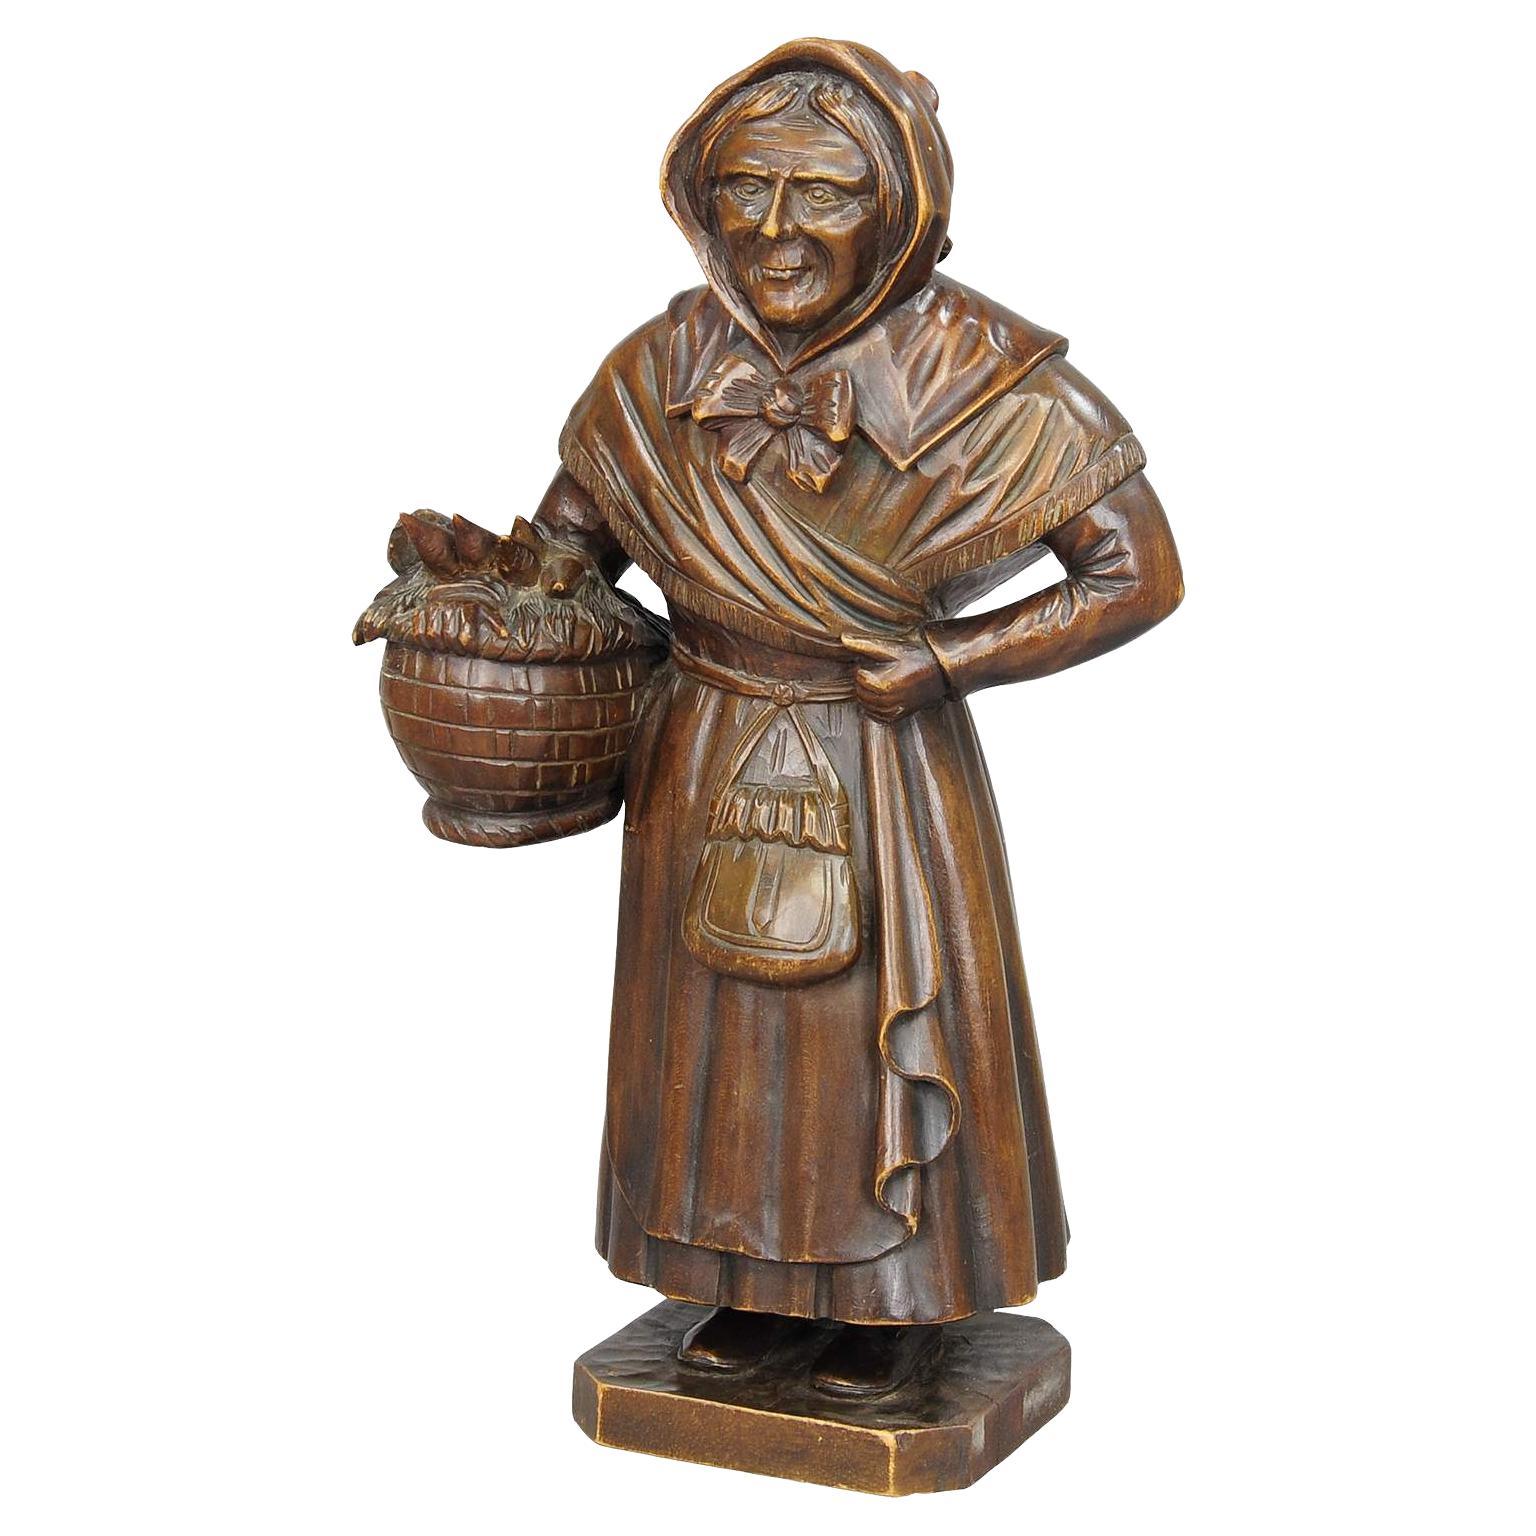 Antique Wooden Carved Sculpture of a Folksy Countrywoman For Sale